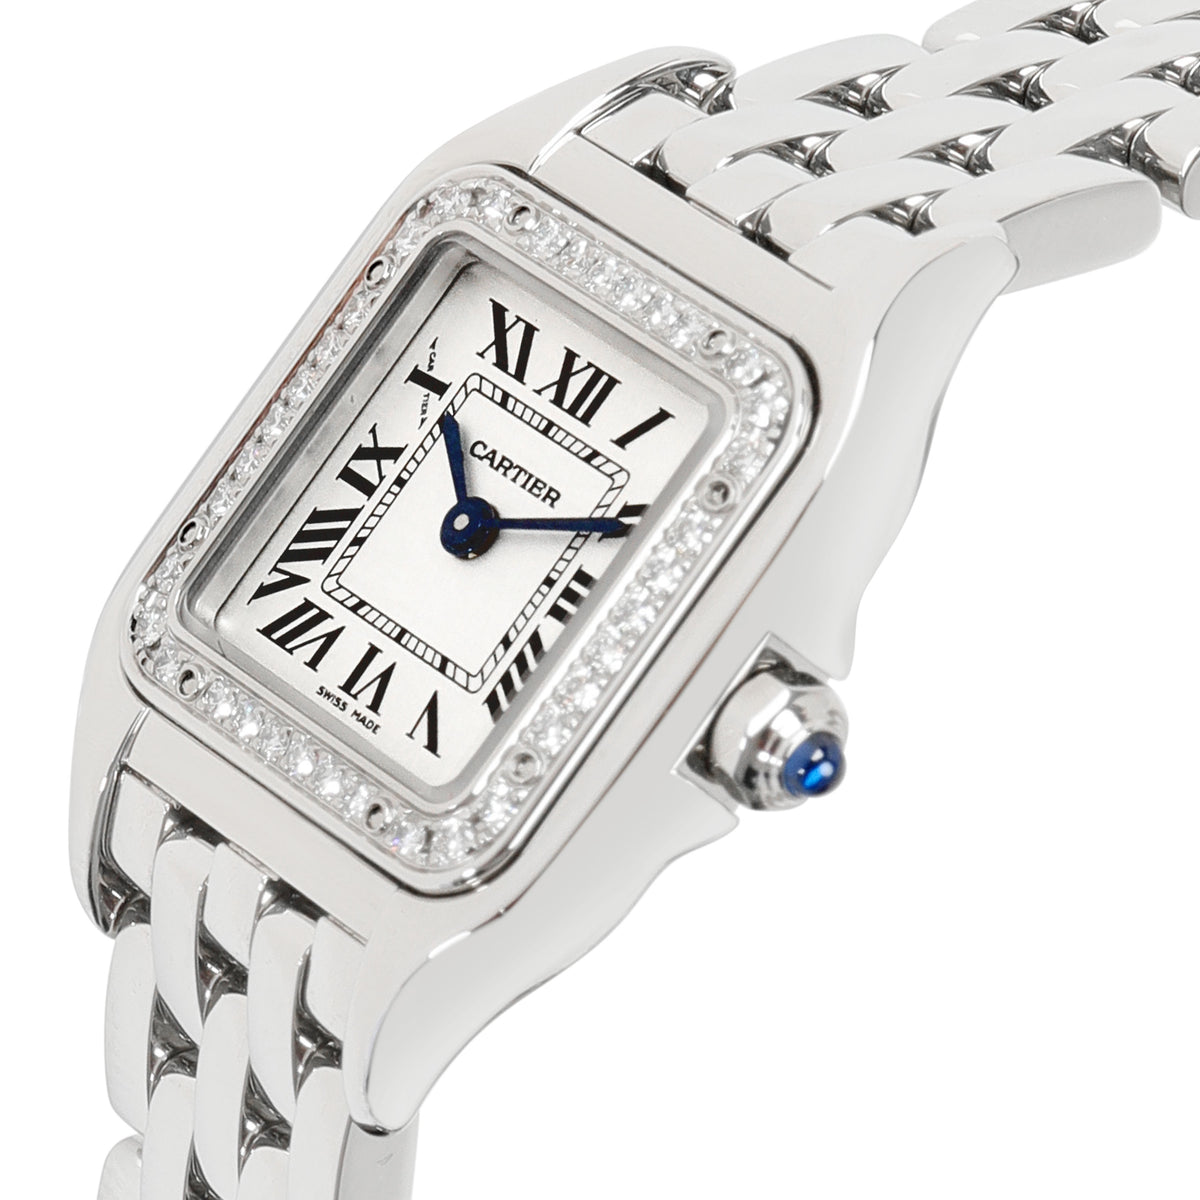 Cartier Panthere W4PN0007 Women's Watch in  Stainless Steel